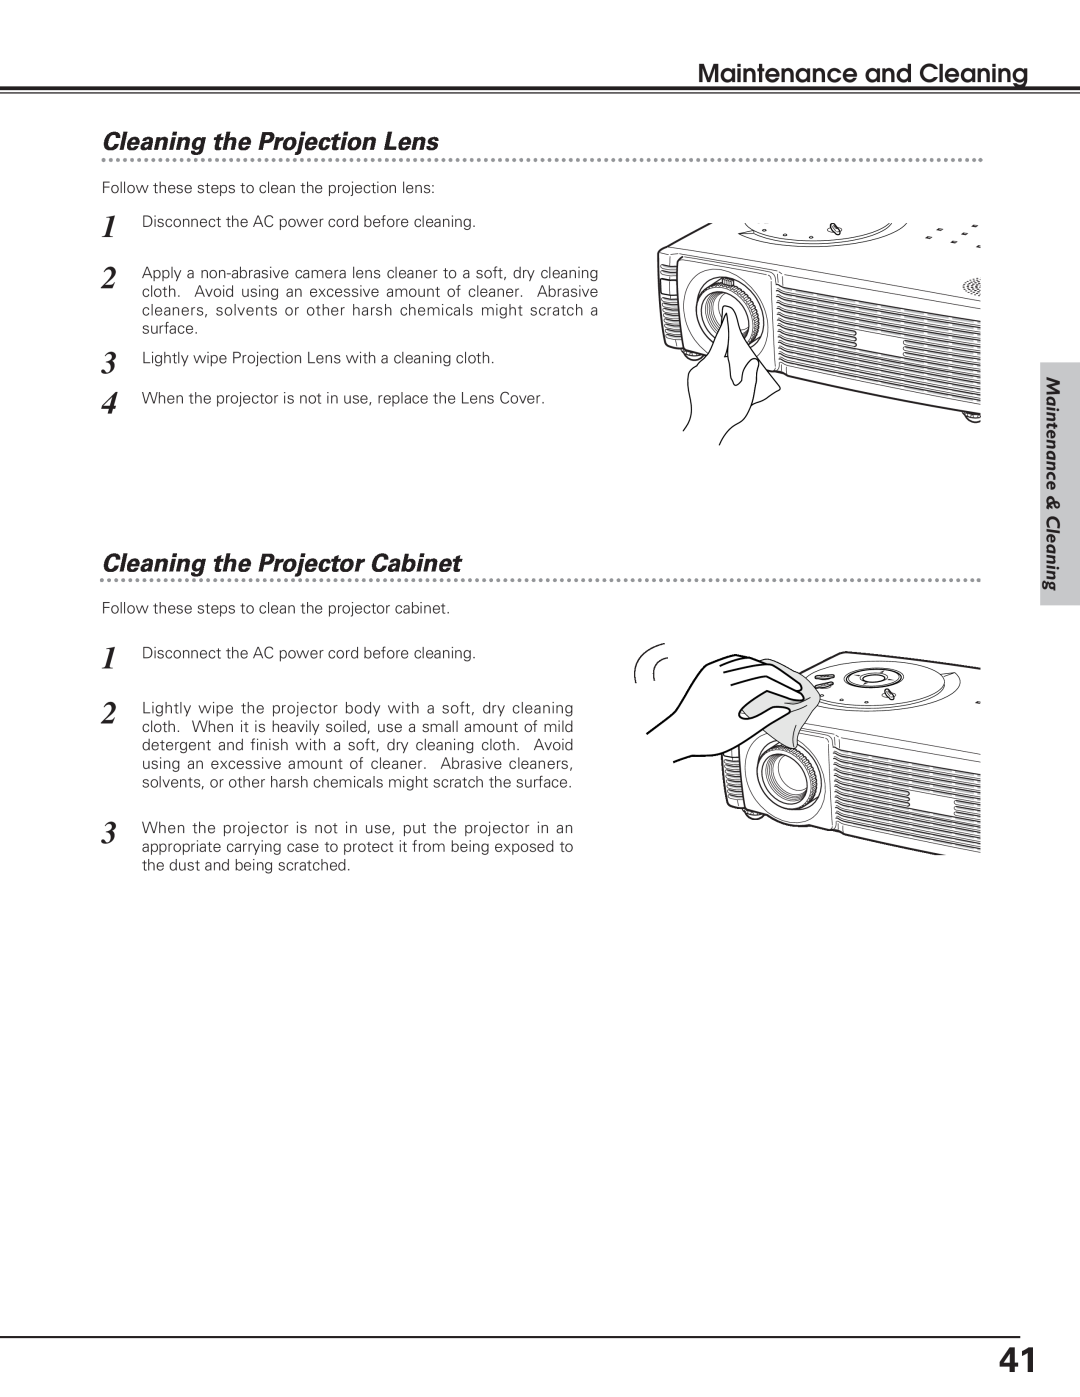 Eiki LC-SD12 owner manual Cleaning the Projection Lens, Cleaning the Projector Cabinet, Maintenance & Cleaning 